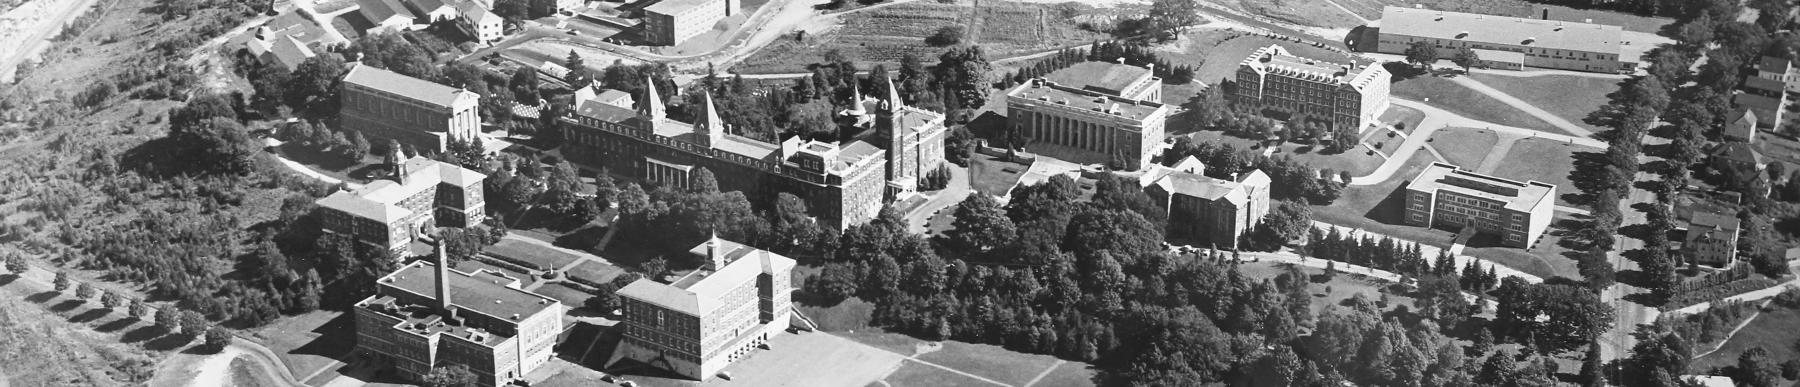 historical black and white aerial photo of the Holy Cross campus